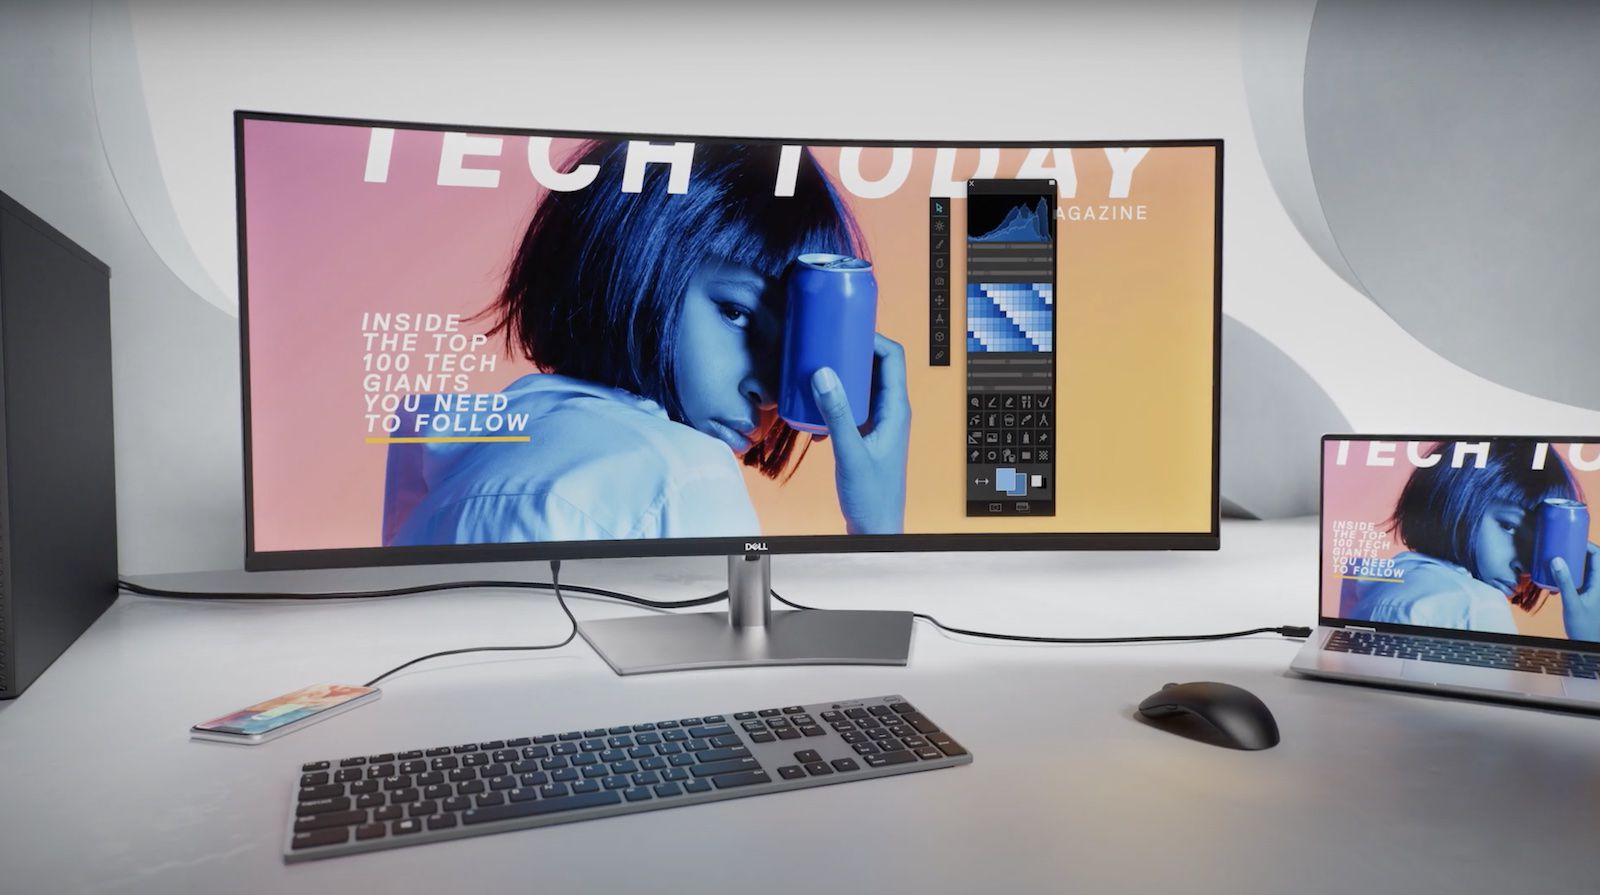 CES 2021: Dell Introduces 40-inch 5K2K Ultrawide Monitor with Thunderbolt 3 Connection for Macs